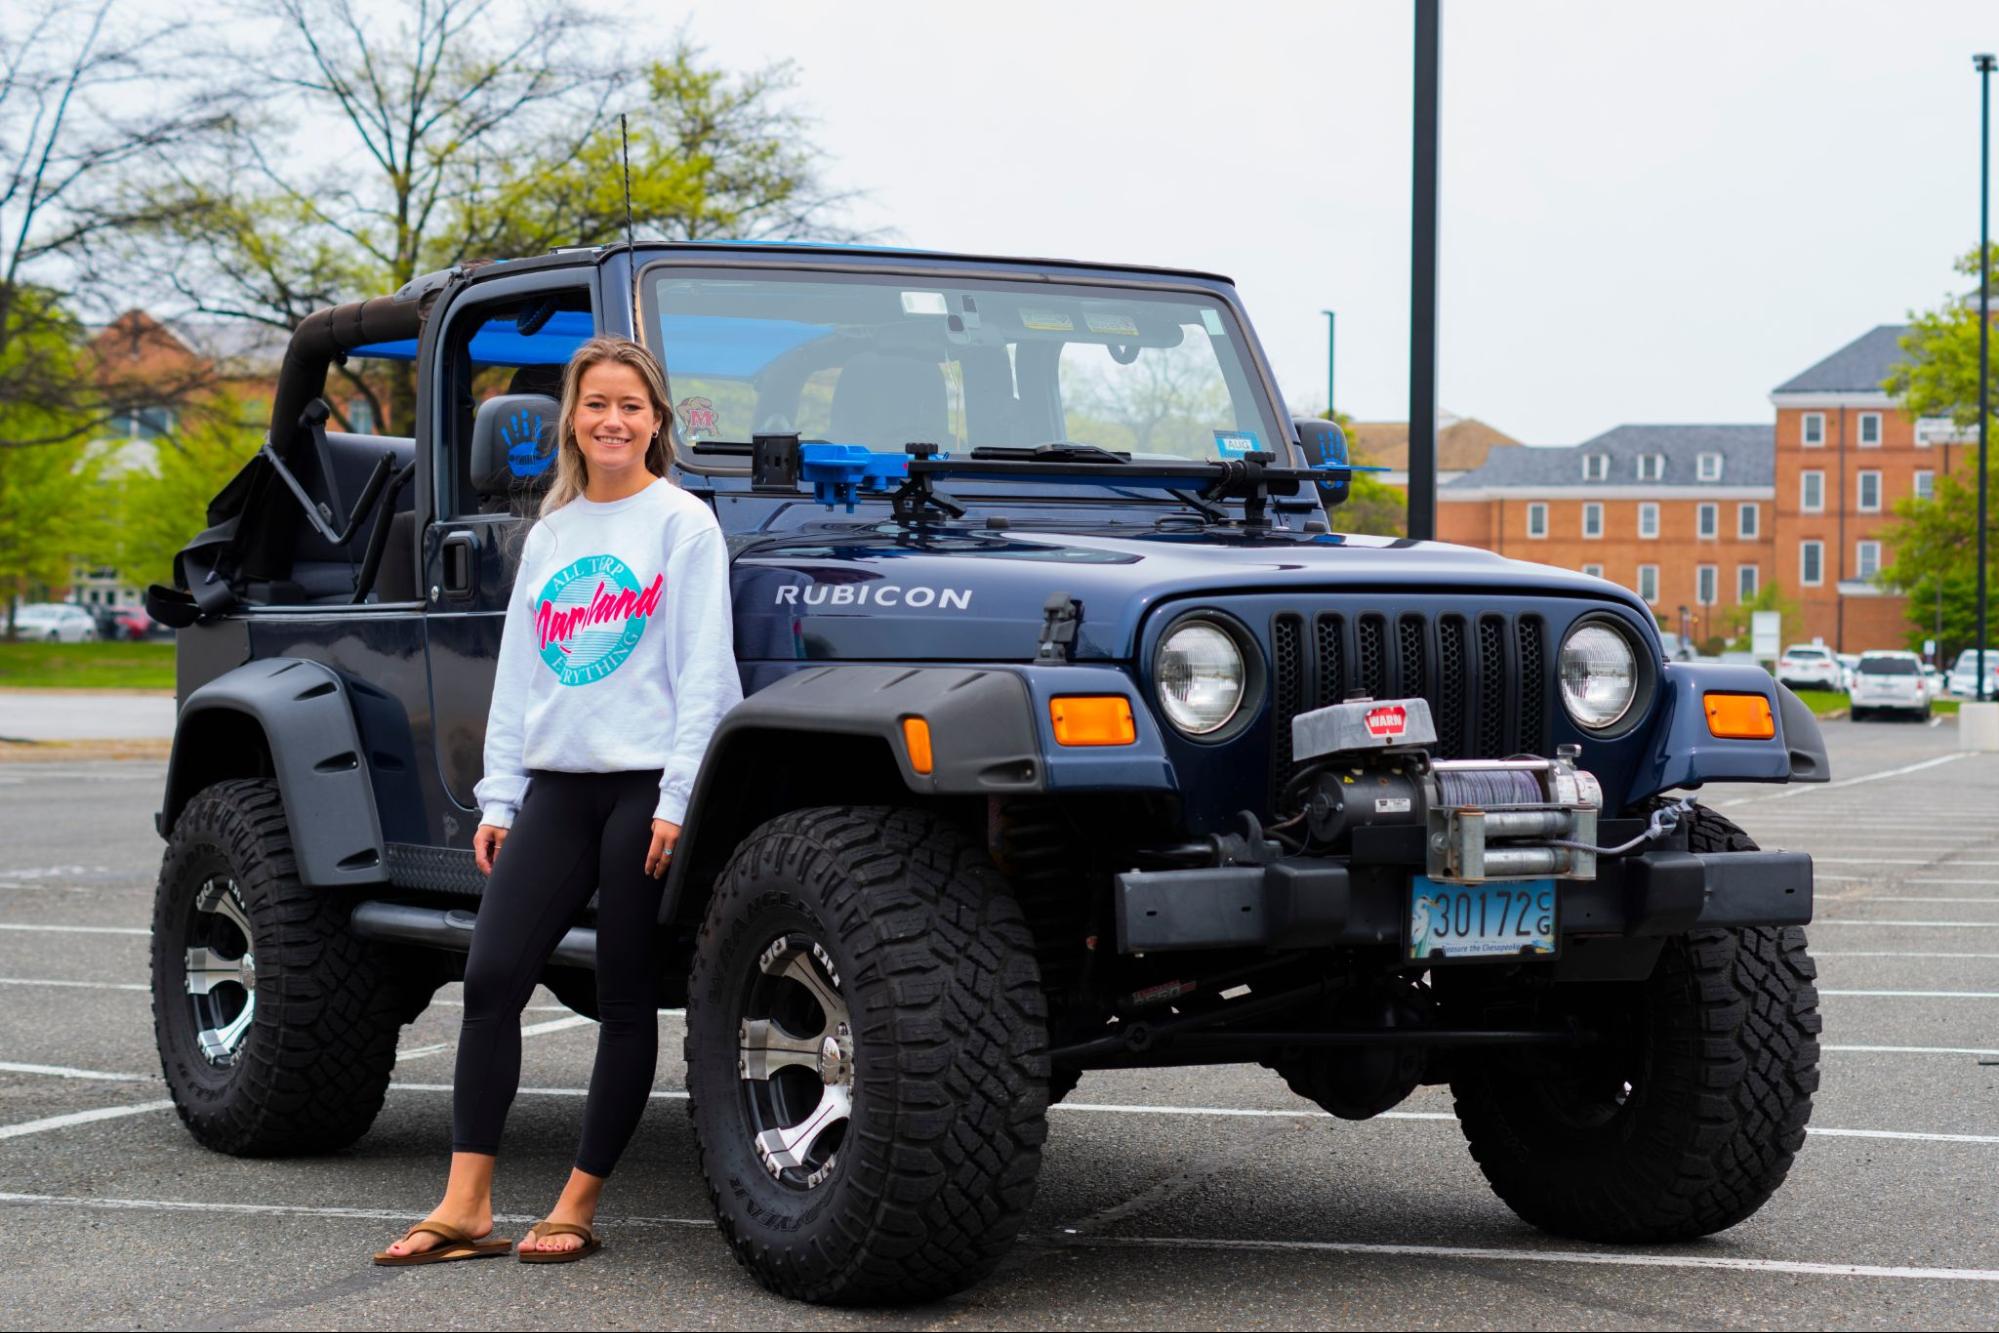 One of a kind: UMD students show off their customized Jeep Wranglers